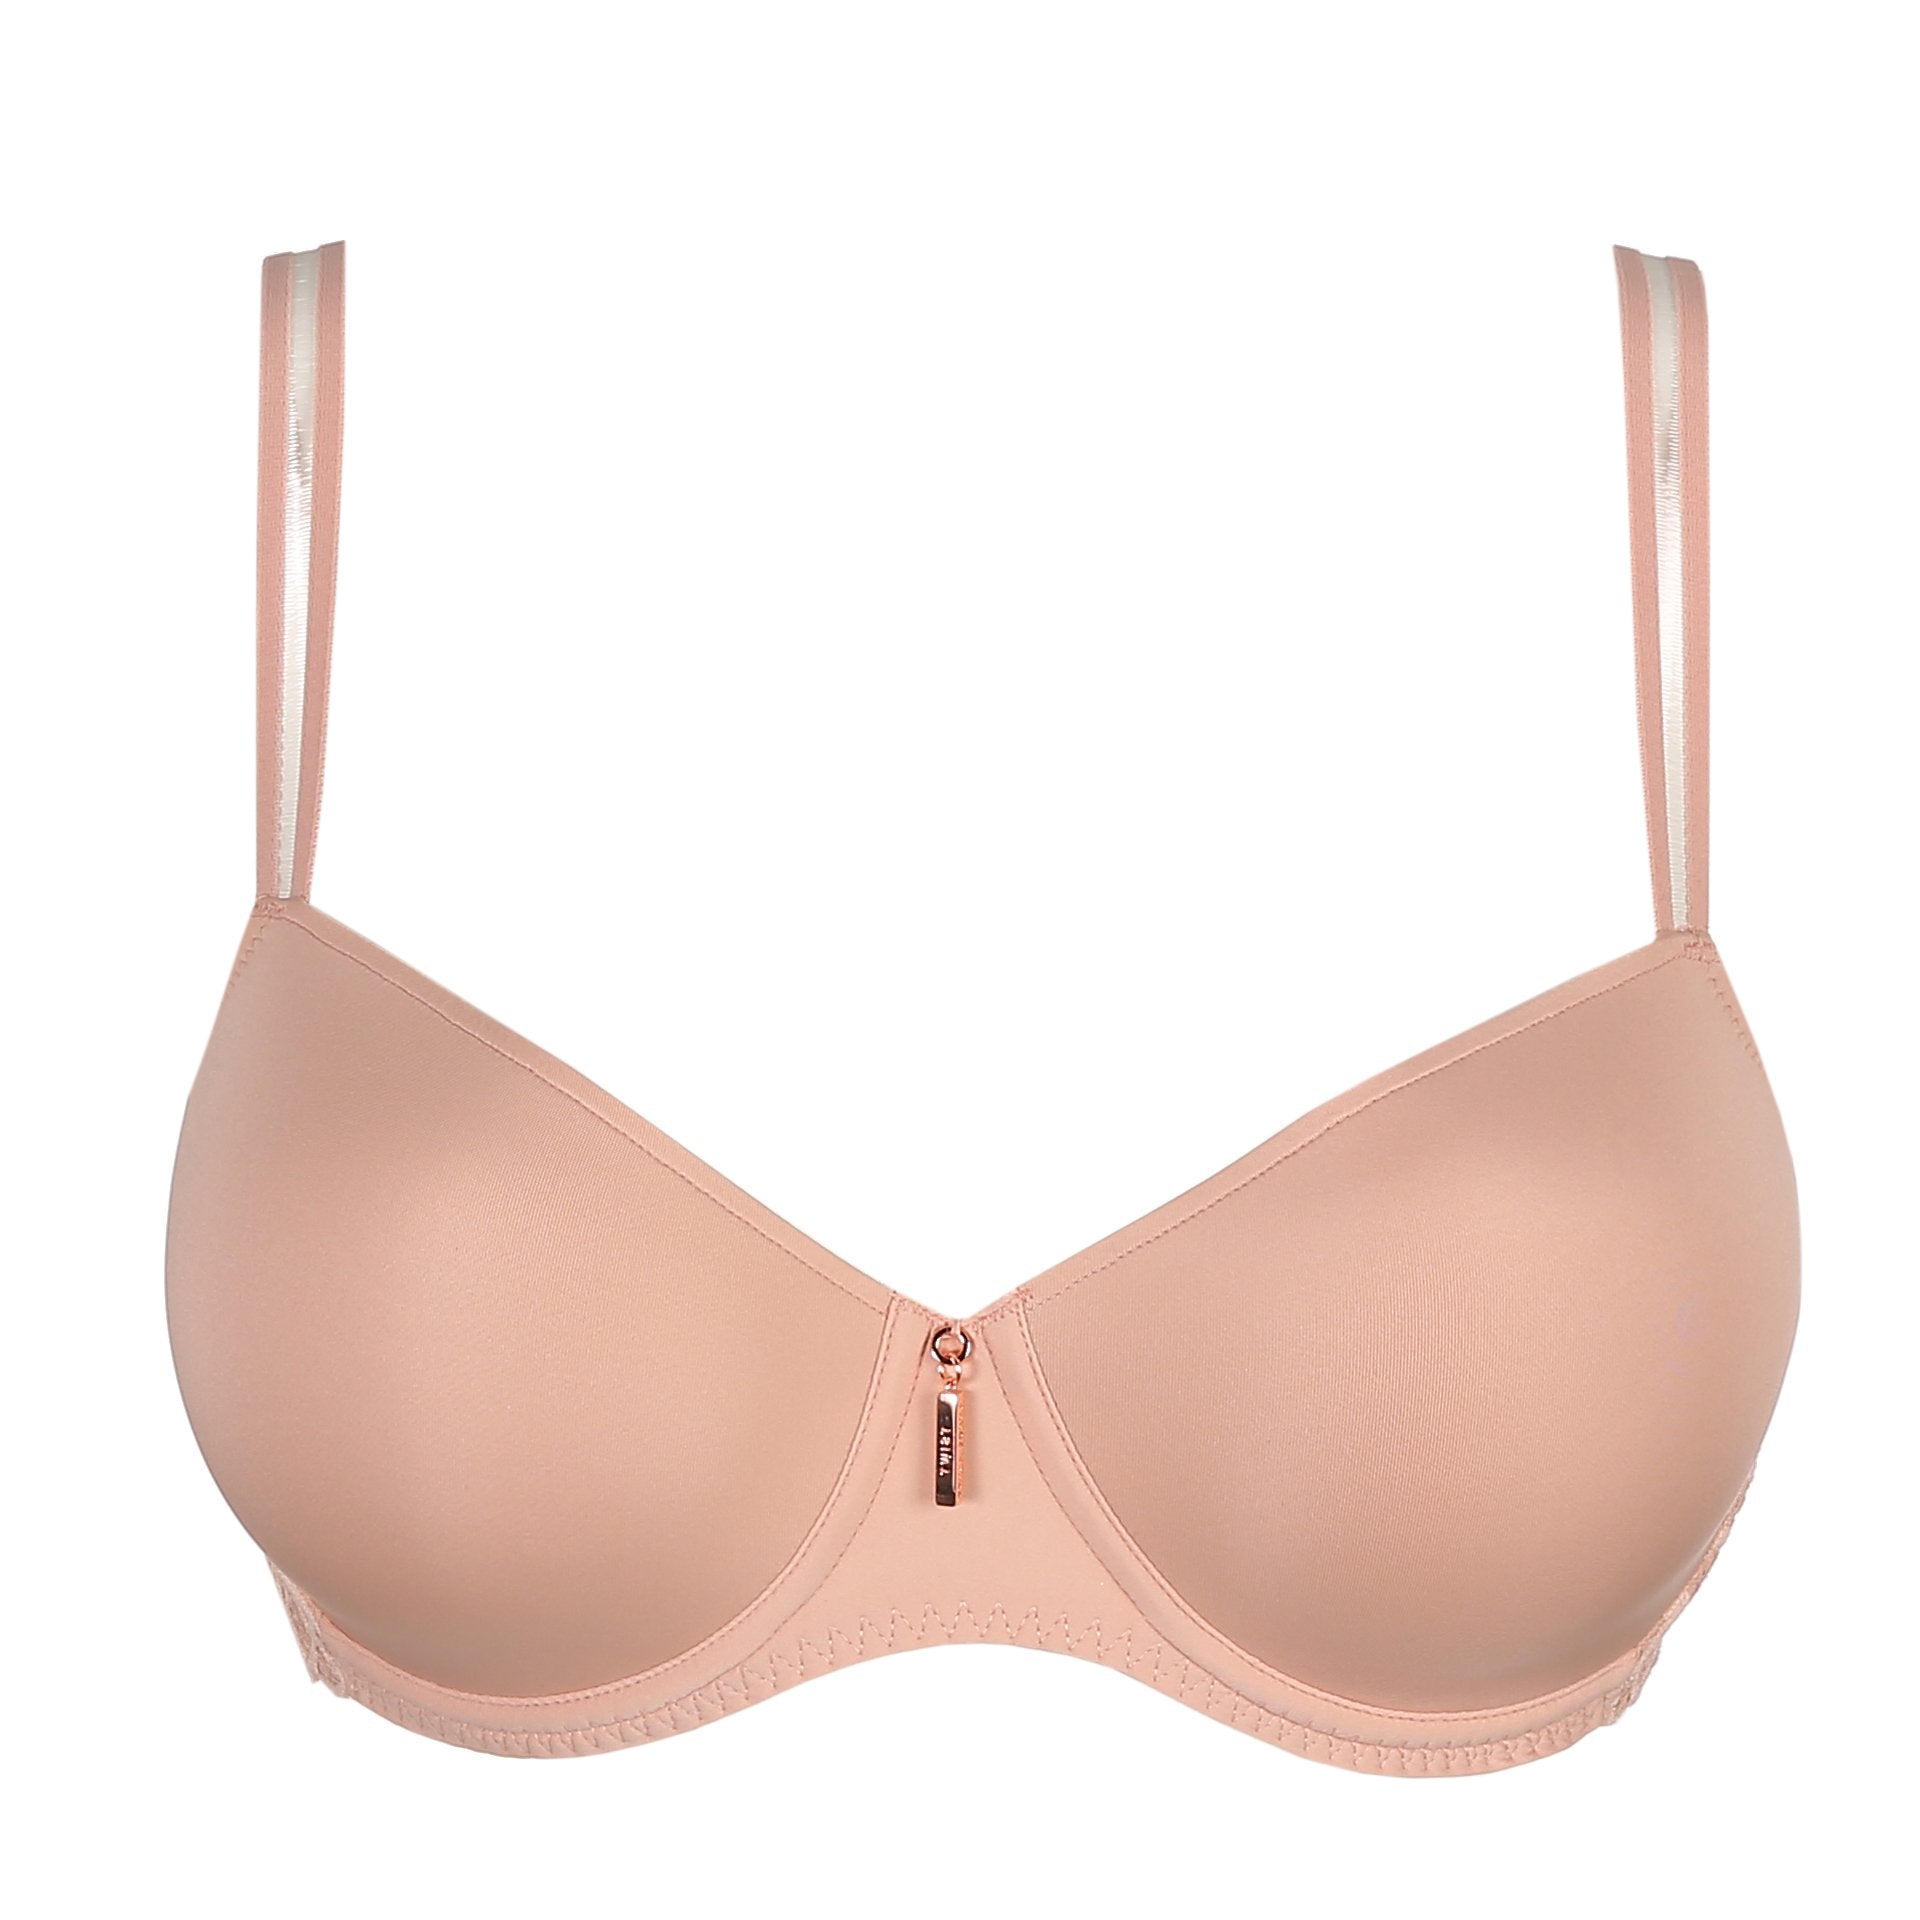 Prima Donna - Padded Heart Bra - East End in Powder Rose – Lily Pad Lingerie